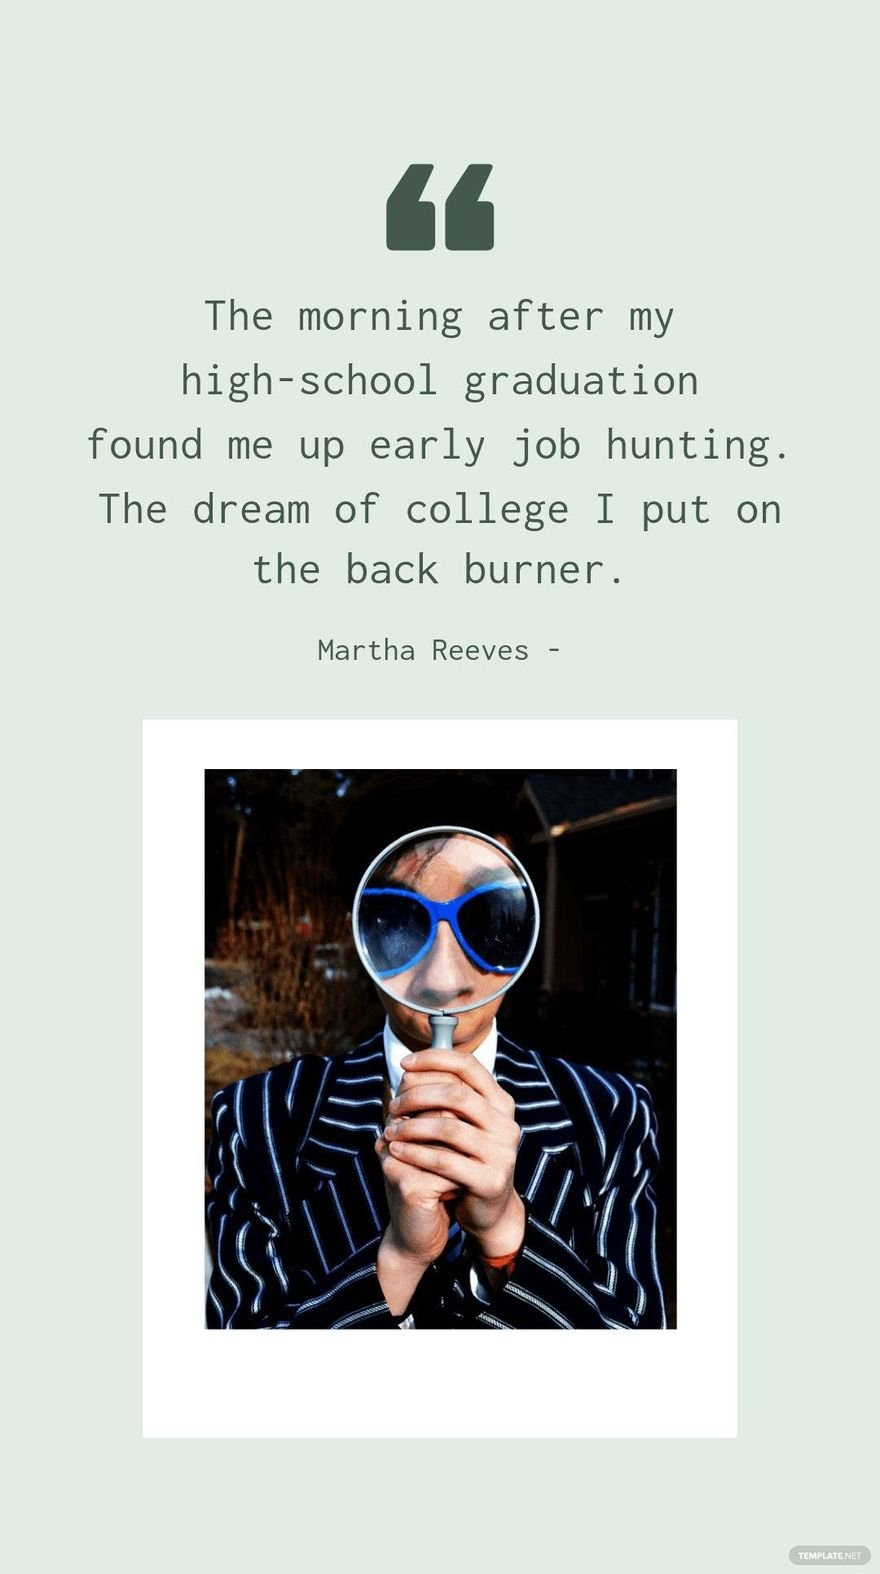 Free Martha Reeves - The morning after my high-school graduation found me up early job hunting. The dream of college I put on the back burner.